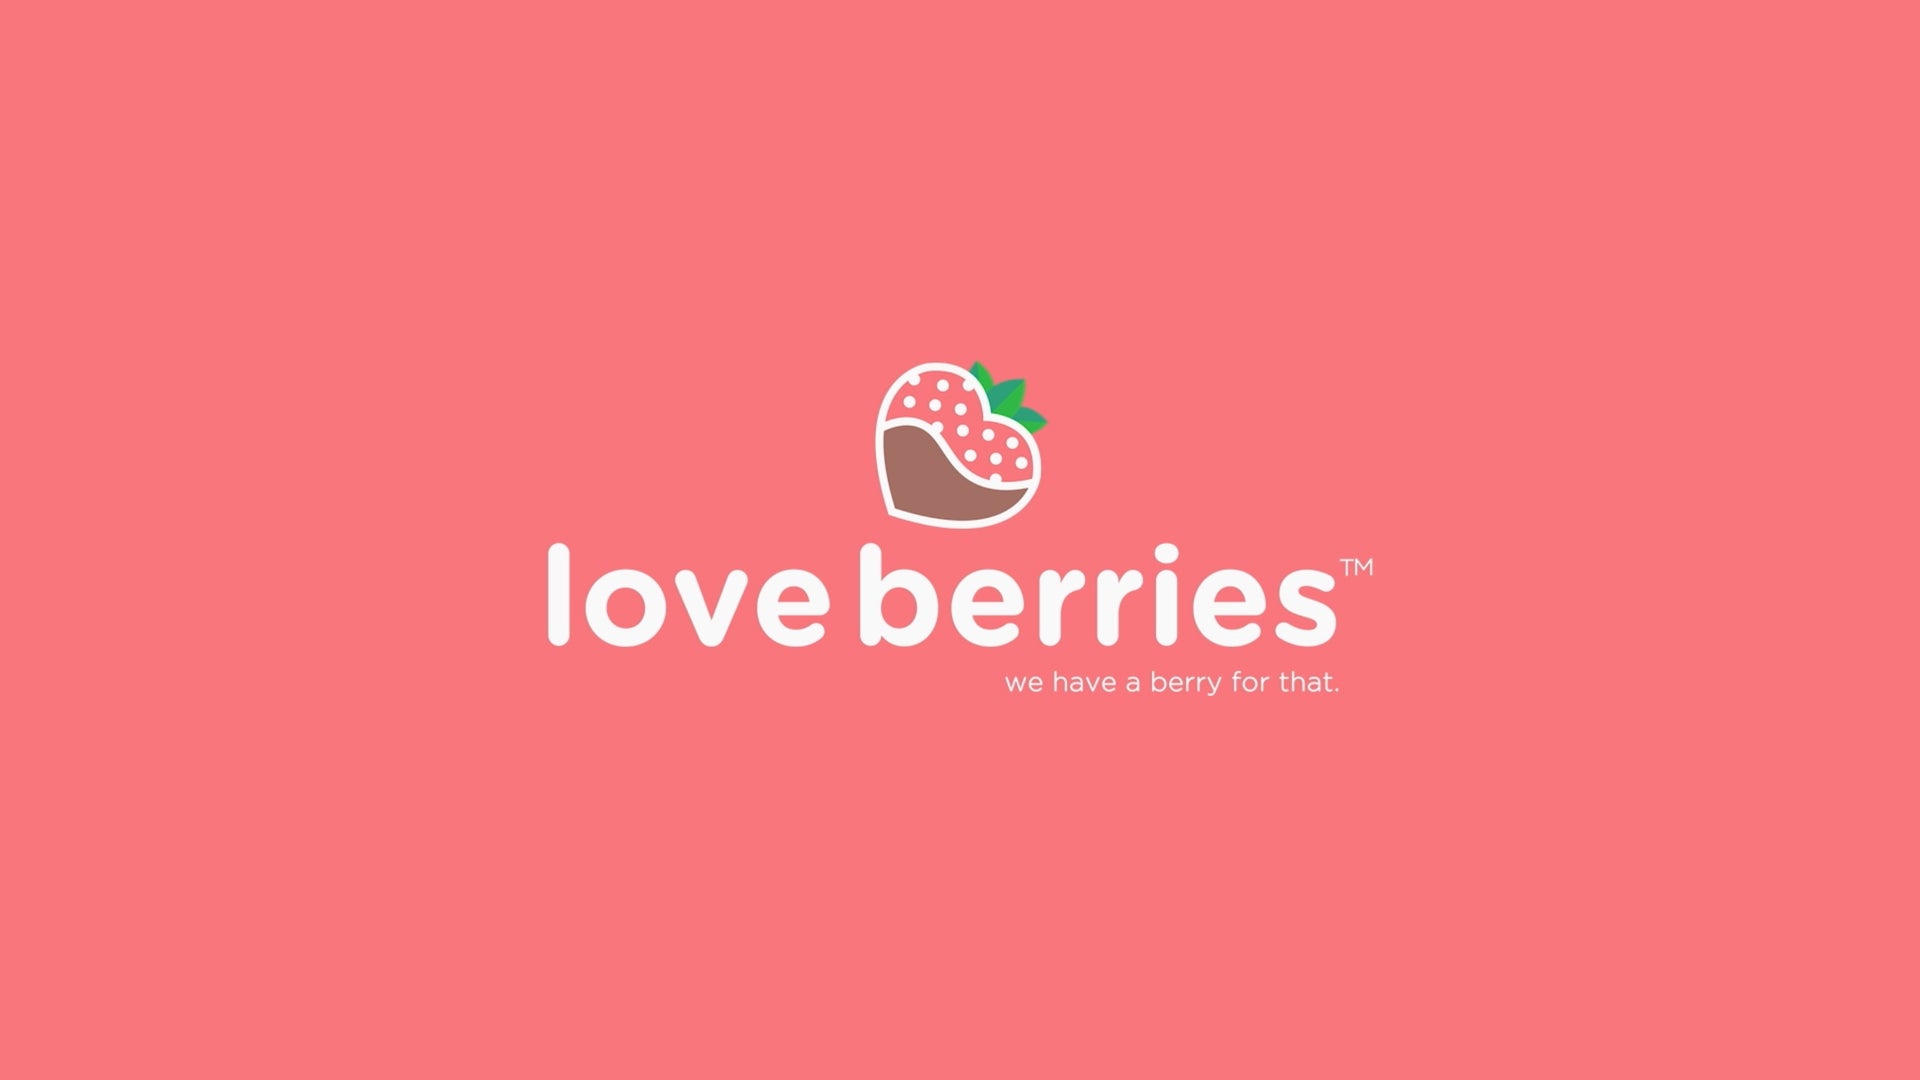 Load video: Shop LoveBerries we have a berry for that.